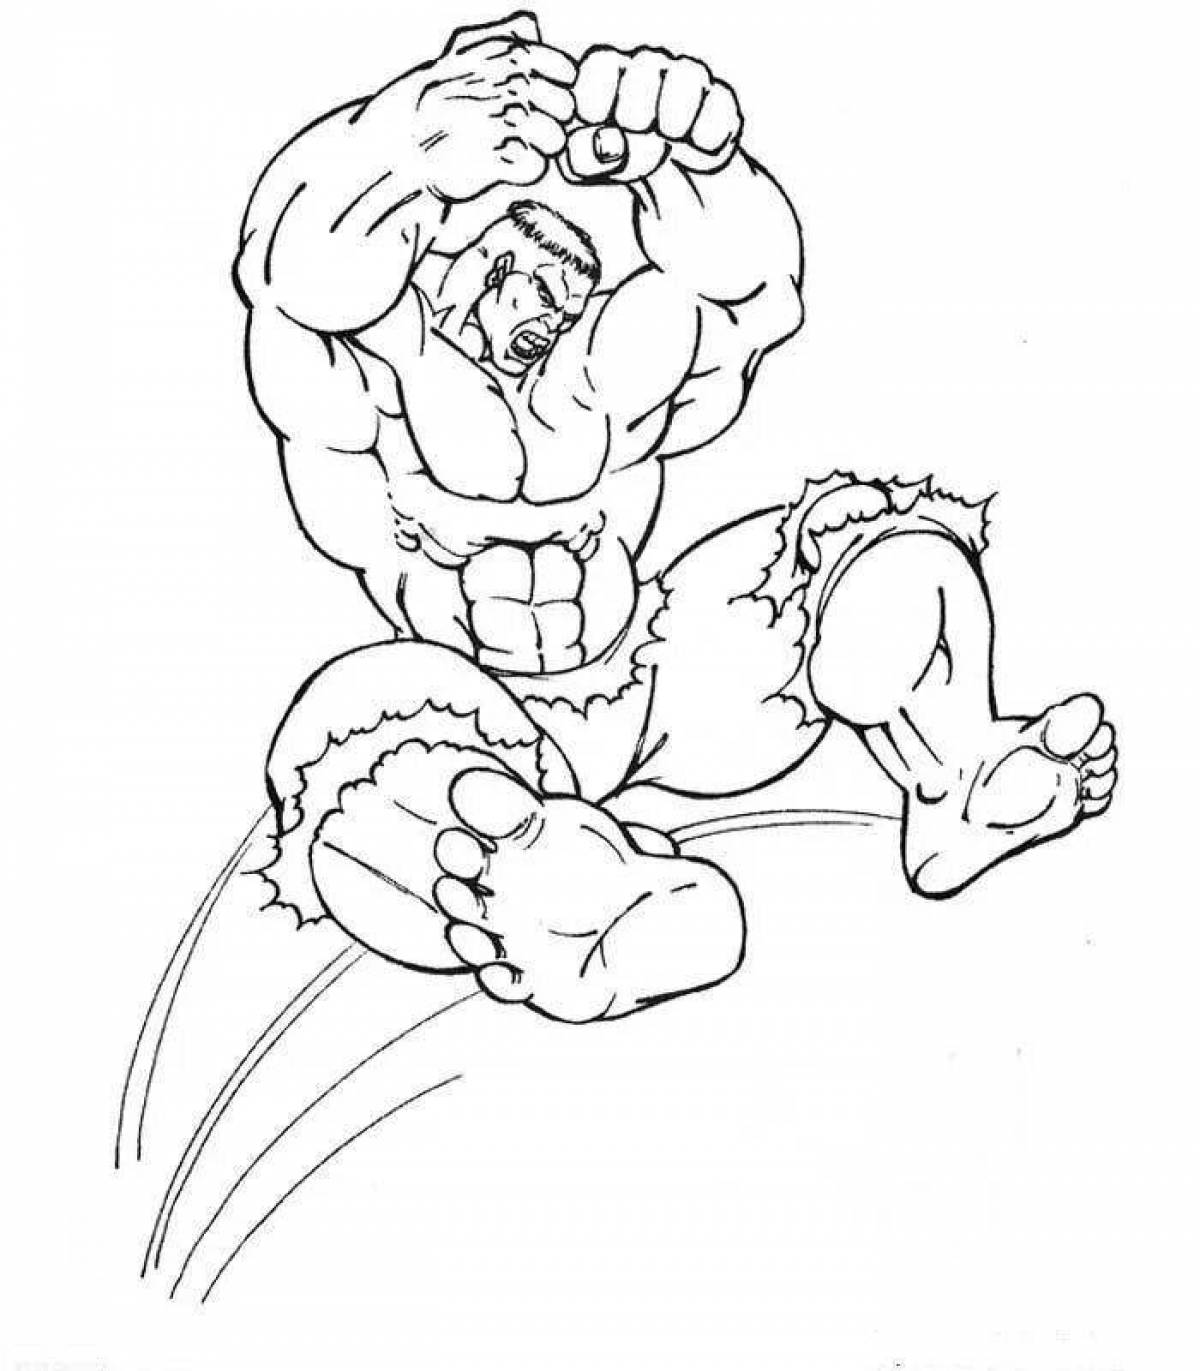 Adorable Hulk coloring page for children 6-7 years old